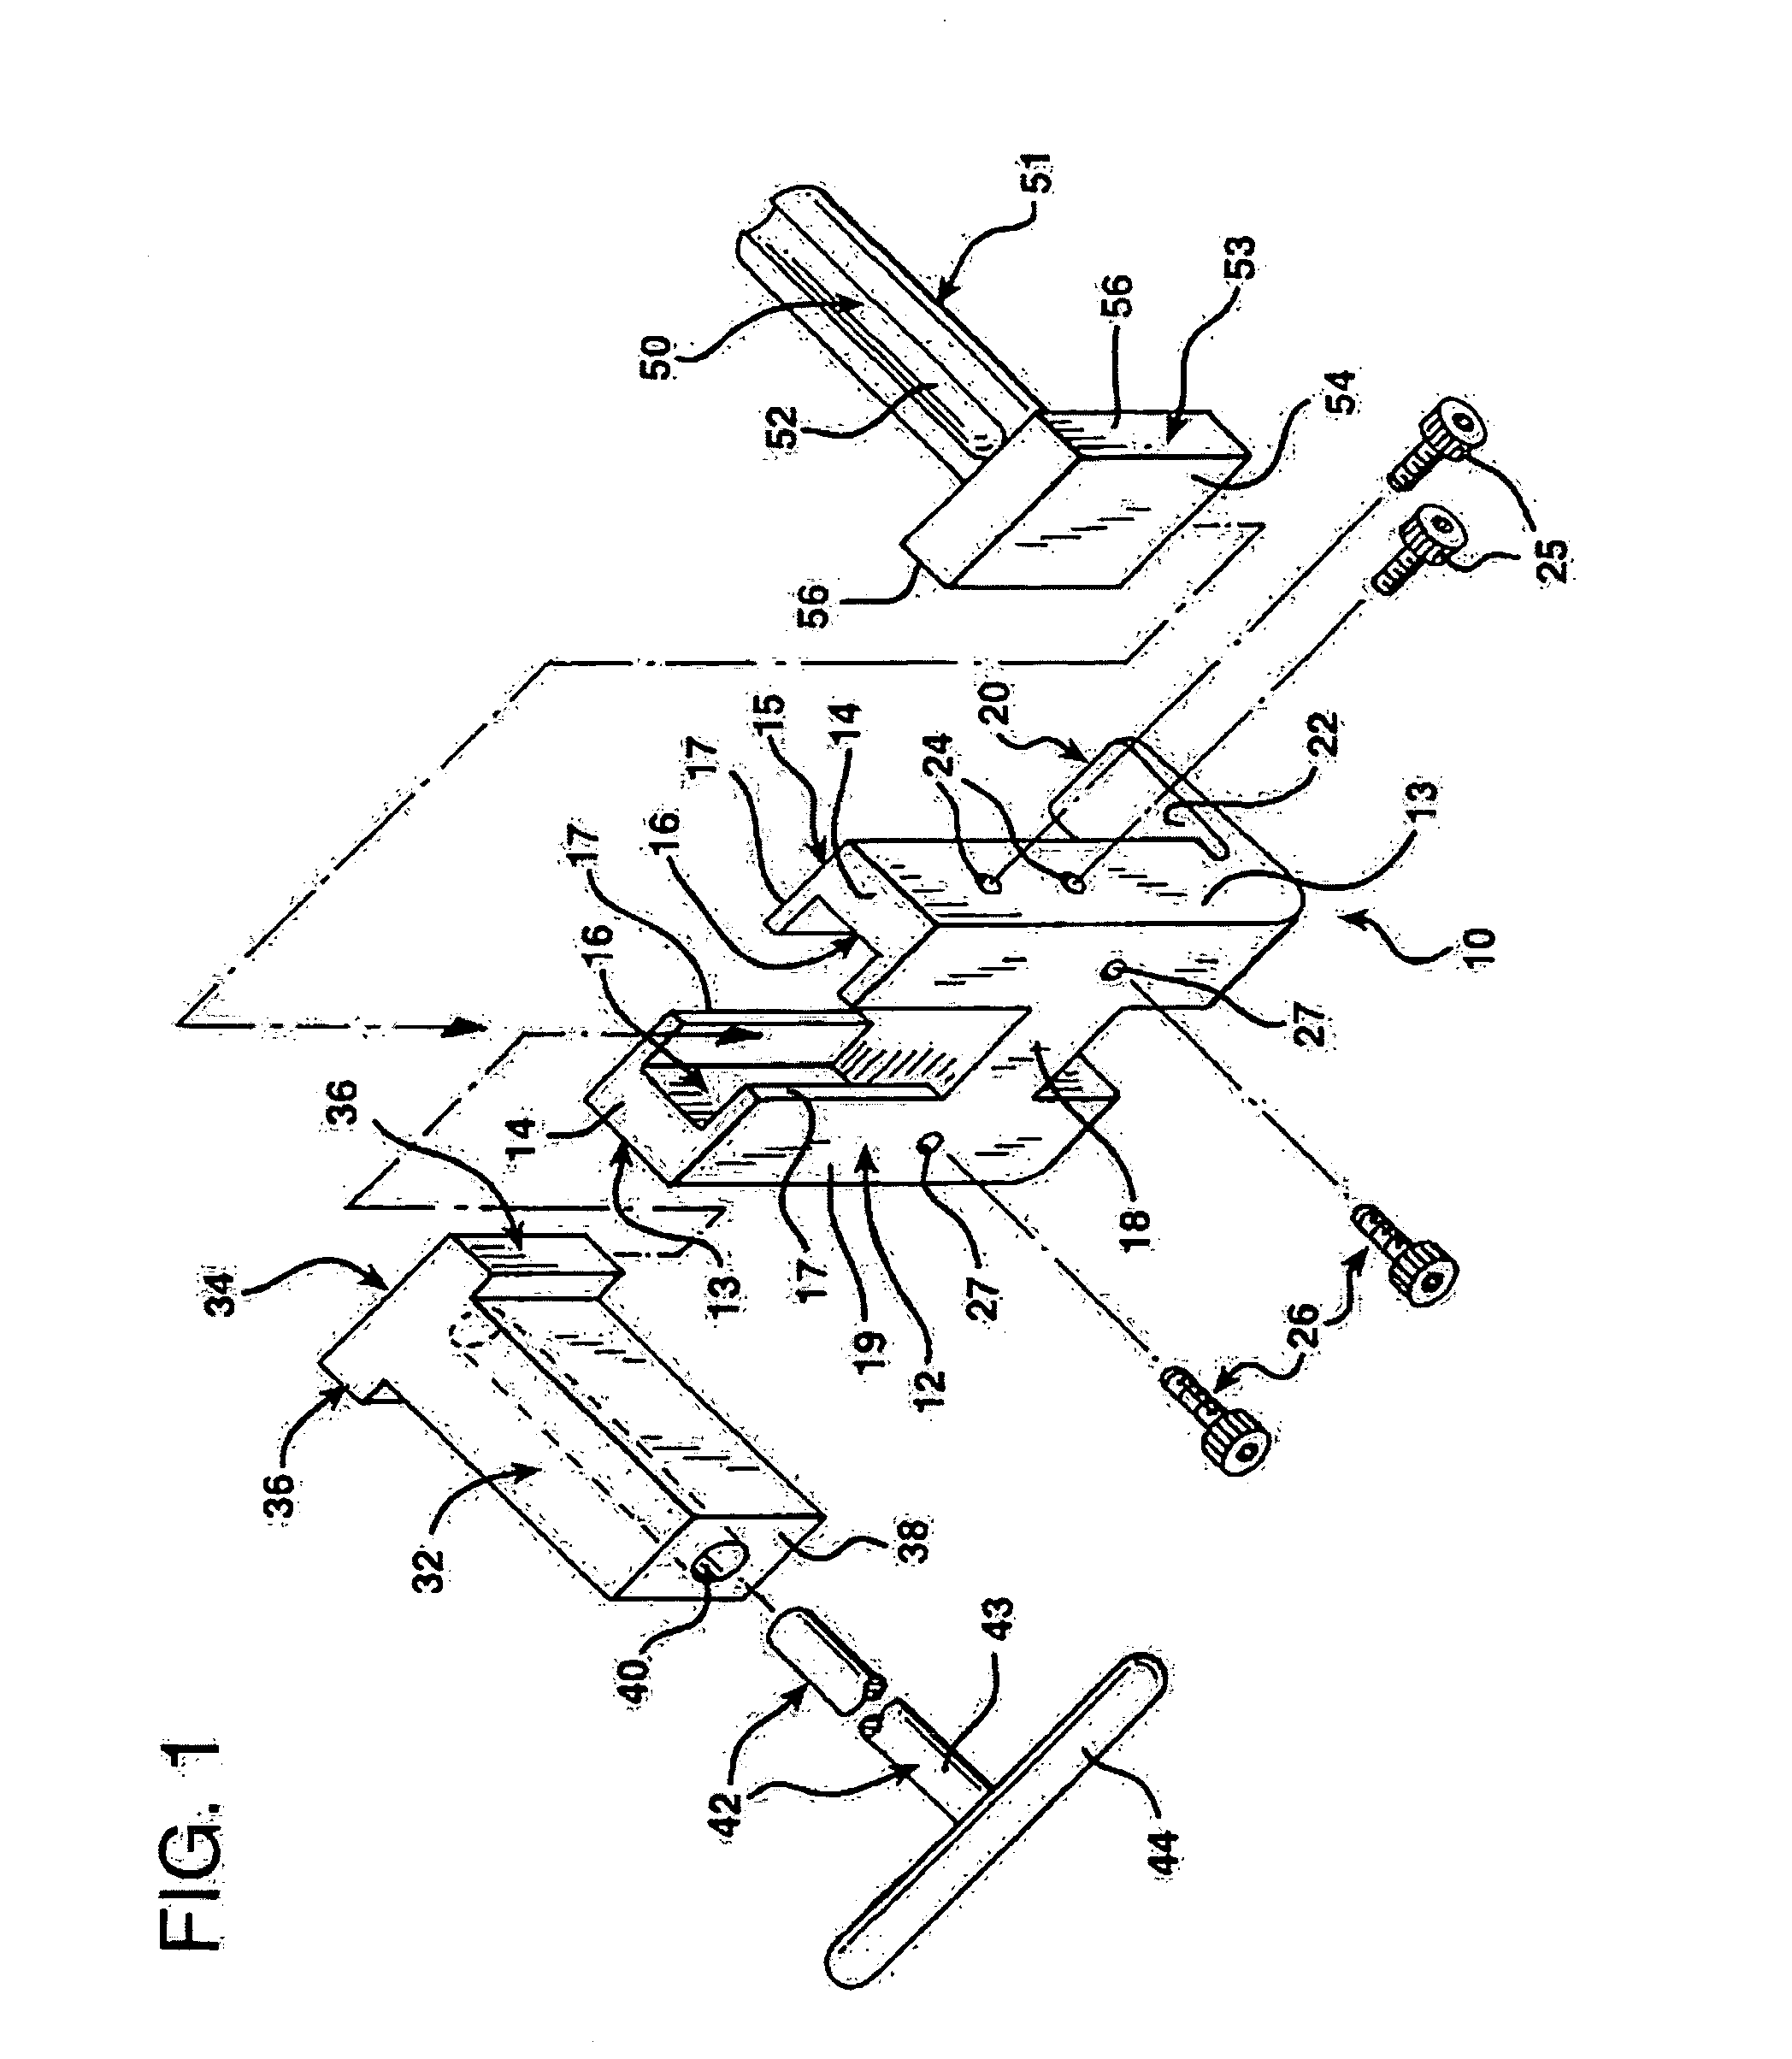 Methods and apparatus for femoral and tibial resection